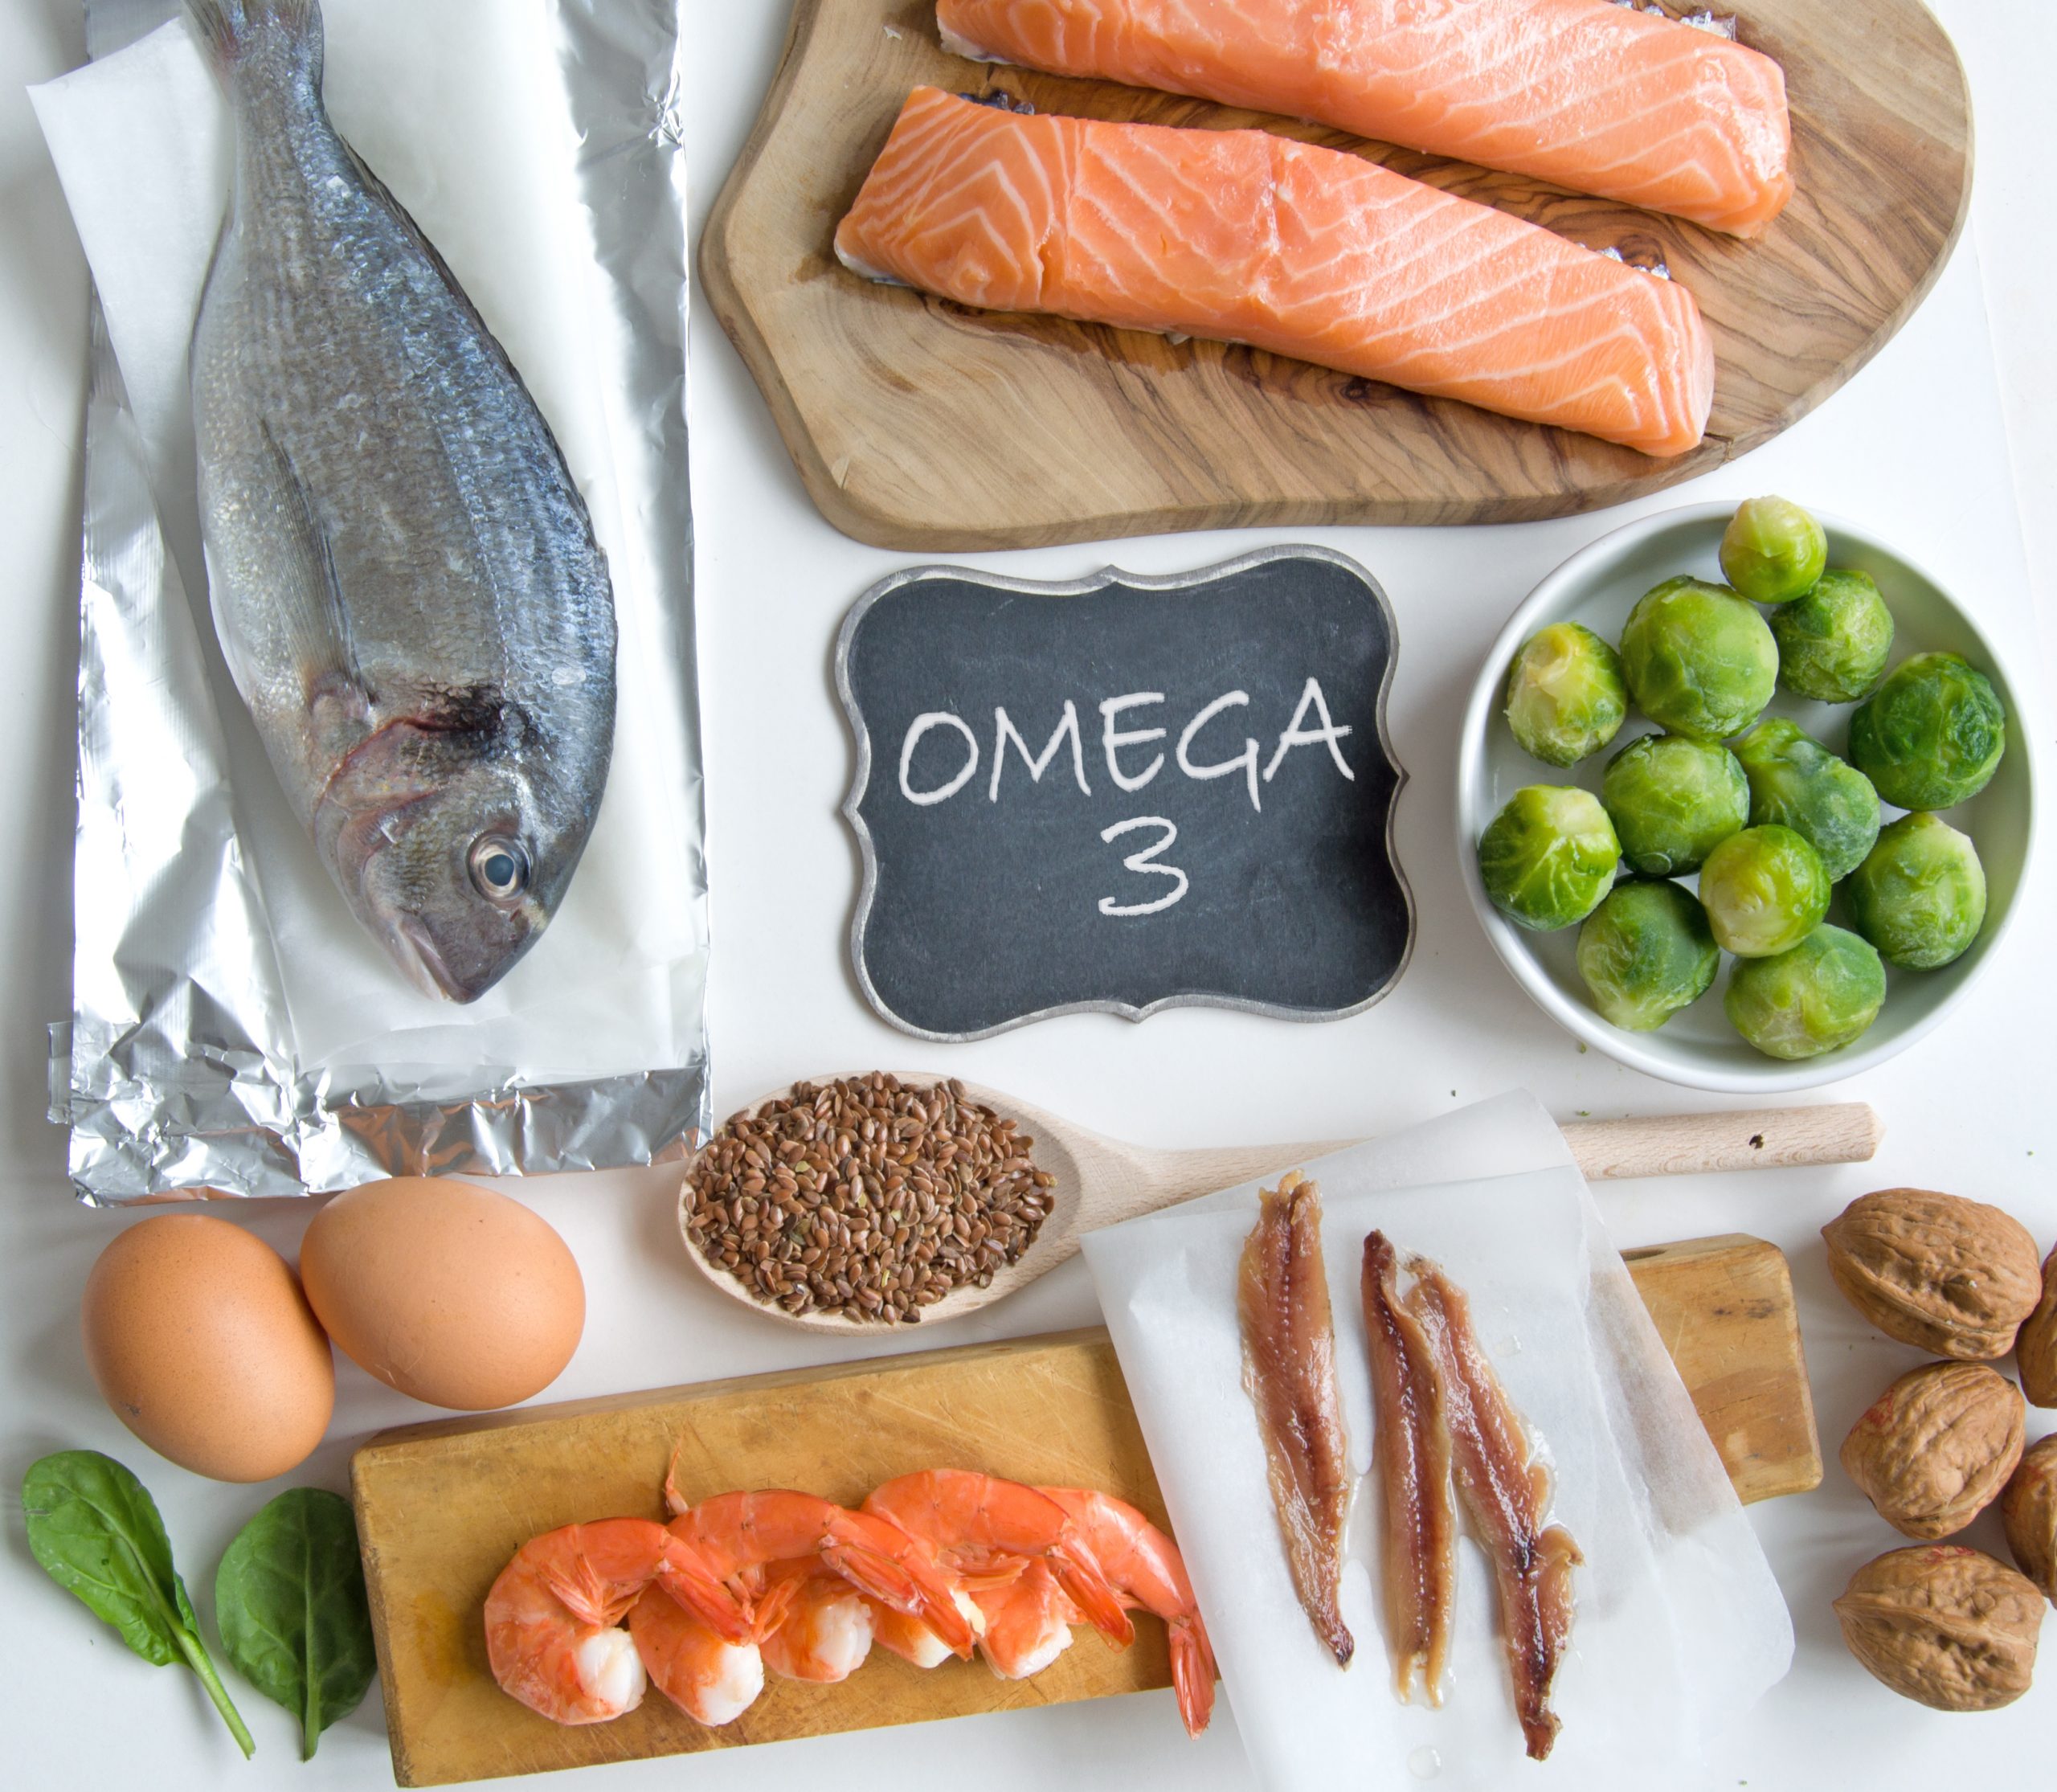 The role of omega-3 fatty acids in promoting brain health